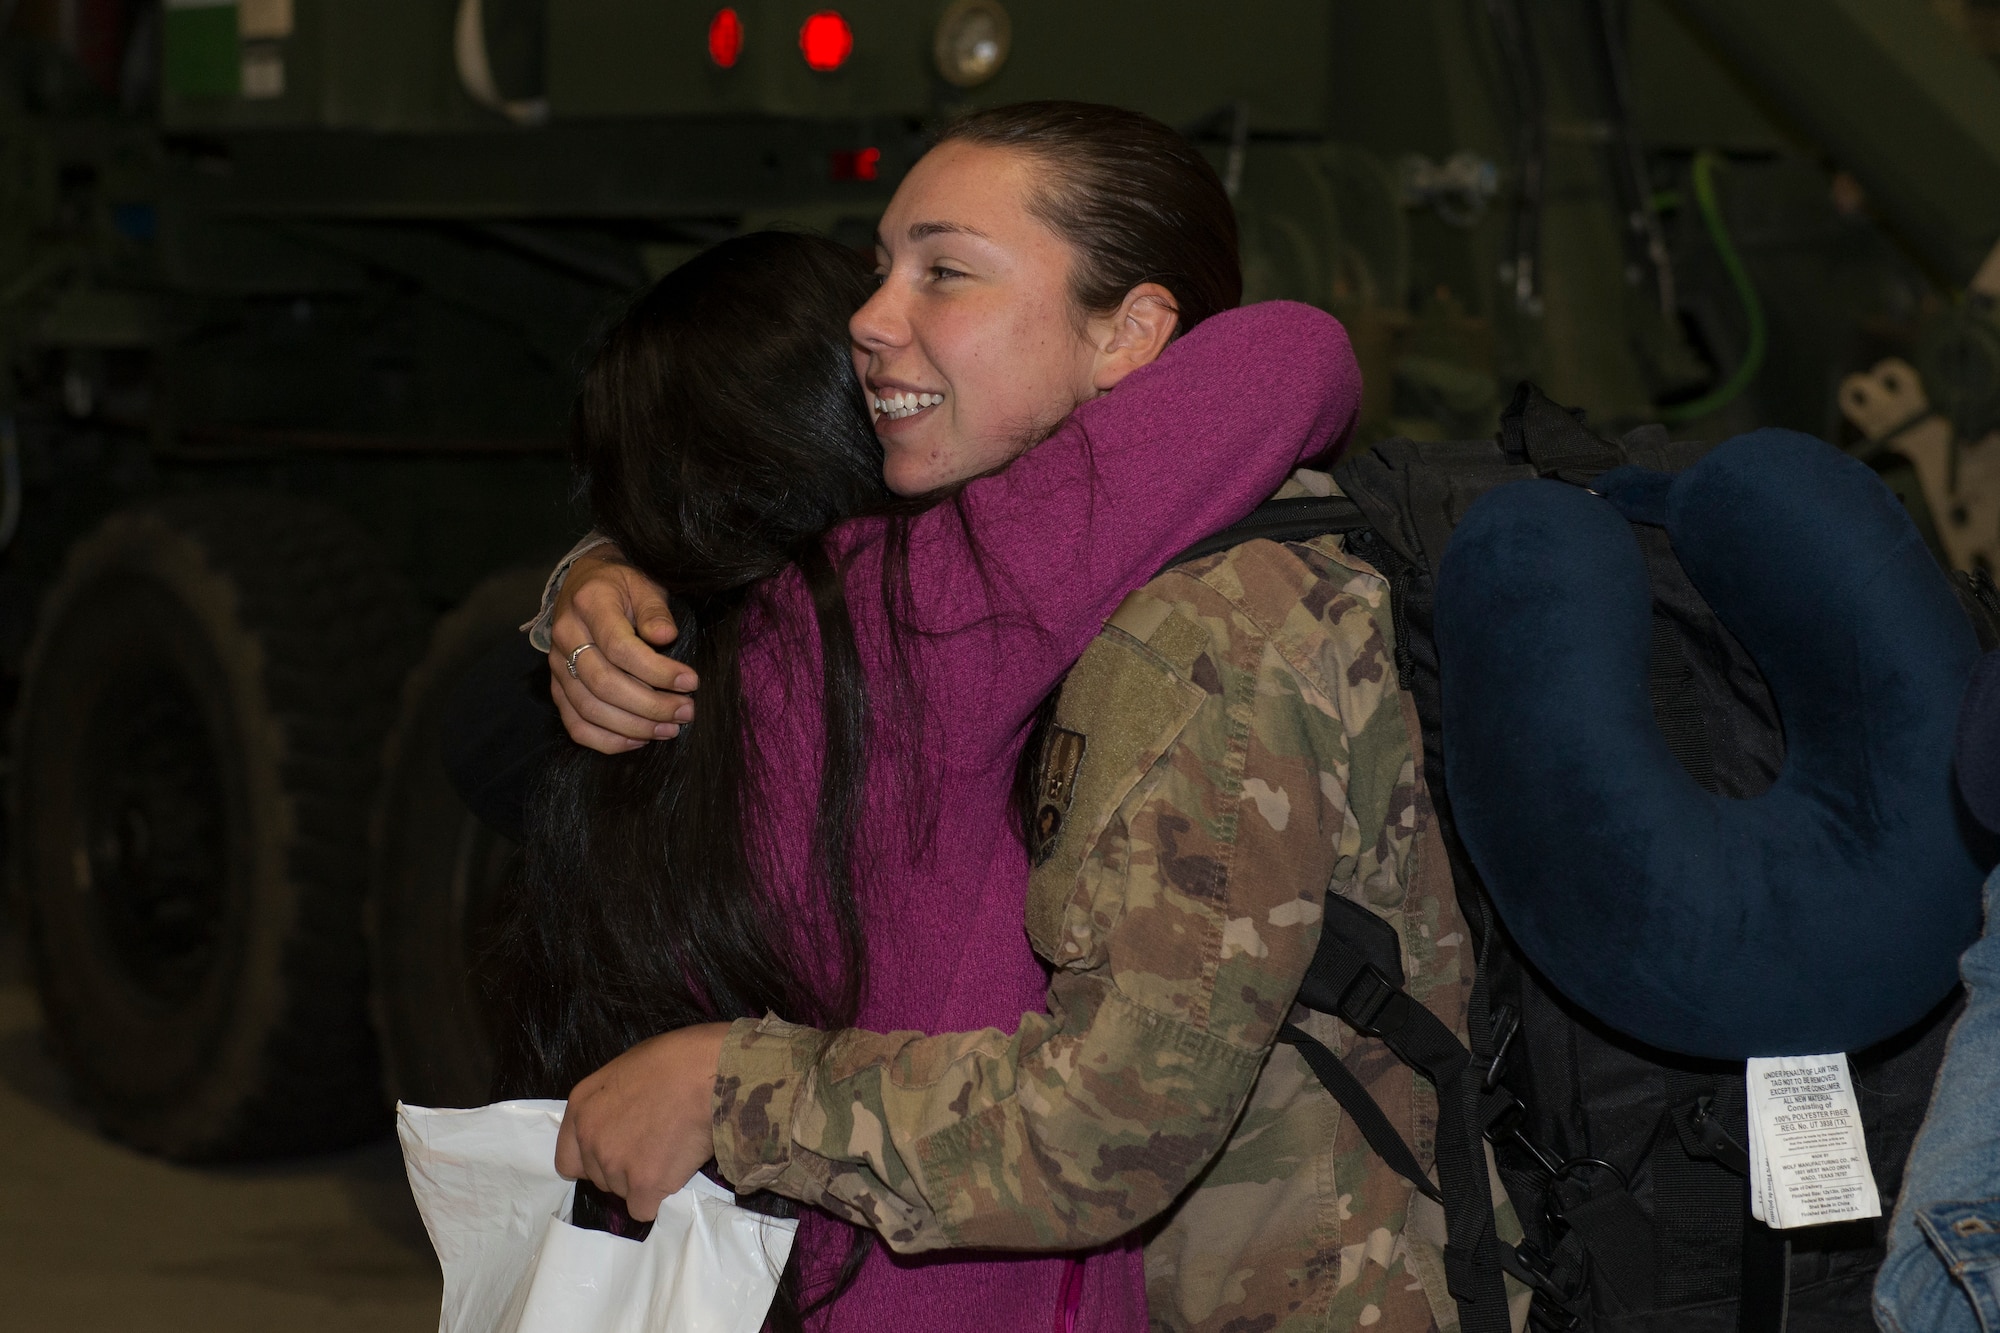 An Airman from the 726th Air Control Squadron returns from deployment and embraces her friend, October 27, 2018, at Mountain Home Air Force Base, Idaho. Over 100 Airmen from the 726th ACS deployed with mission of supporting communication between air craft and ground units. (U.S. Air Force photo by Senior Airman Tyrell Hall)